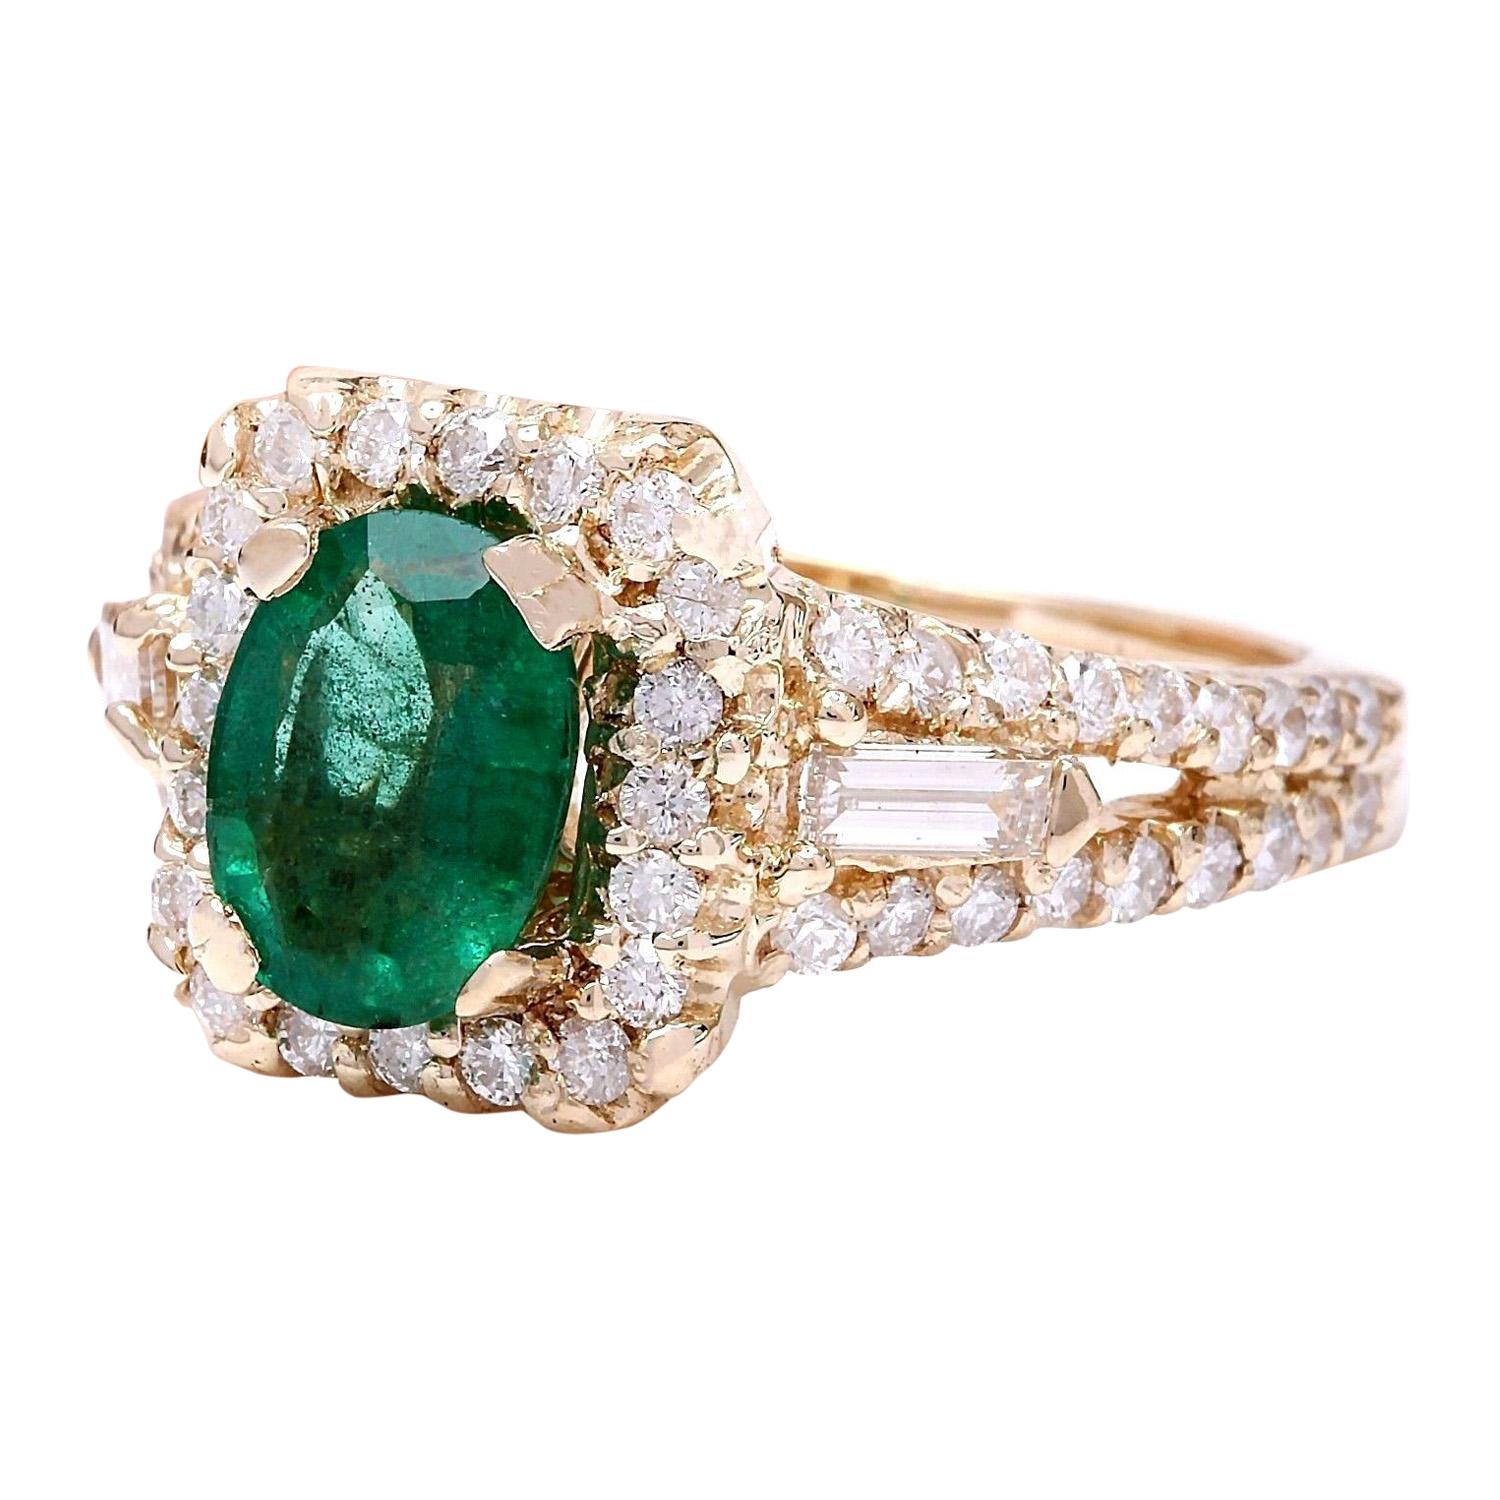 2.80 Carat Natural Emerald 14K Solid Yellow Gold Diamond Ring
 Item Type: Ring
 Item Style: Engagement
 Material: 14K Yellow Gold
 Mainstone: Emerald
 Stone Color: Green
 Stone Weight: 1.80 Carat
 Stone Shape: Oval
 Stone Quantity: 1
 Stone